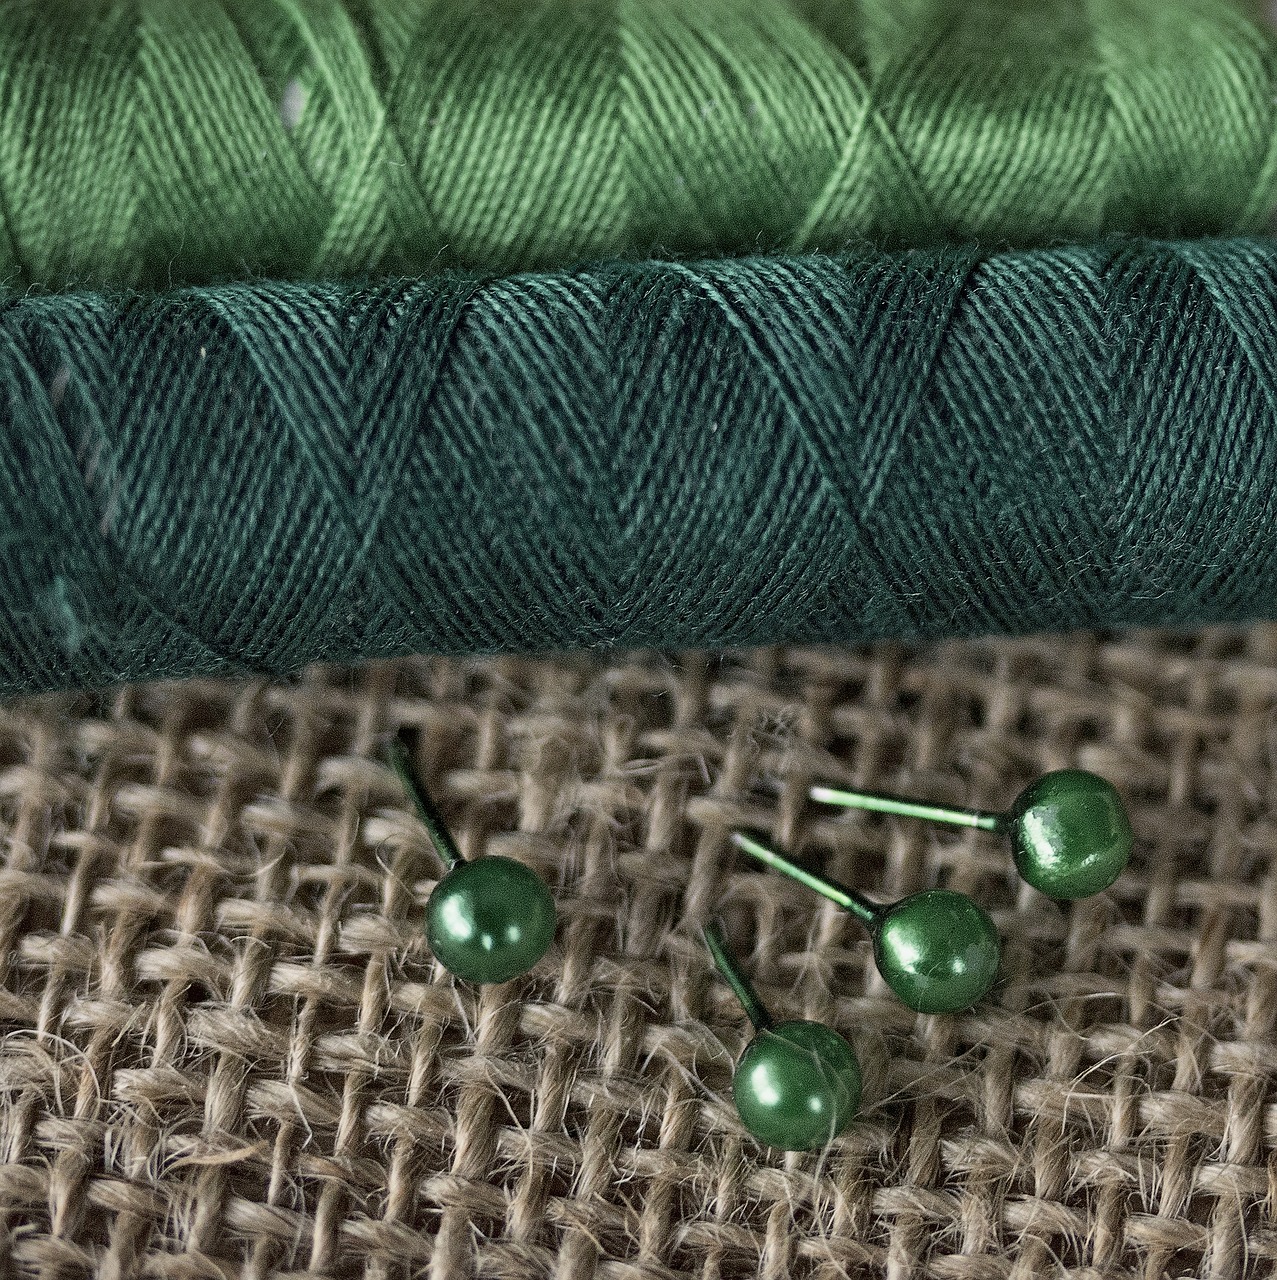 green threads sewing free photo